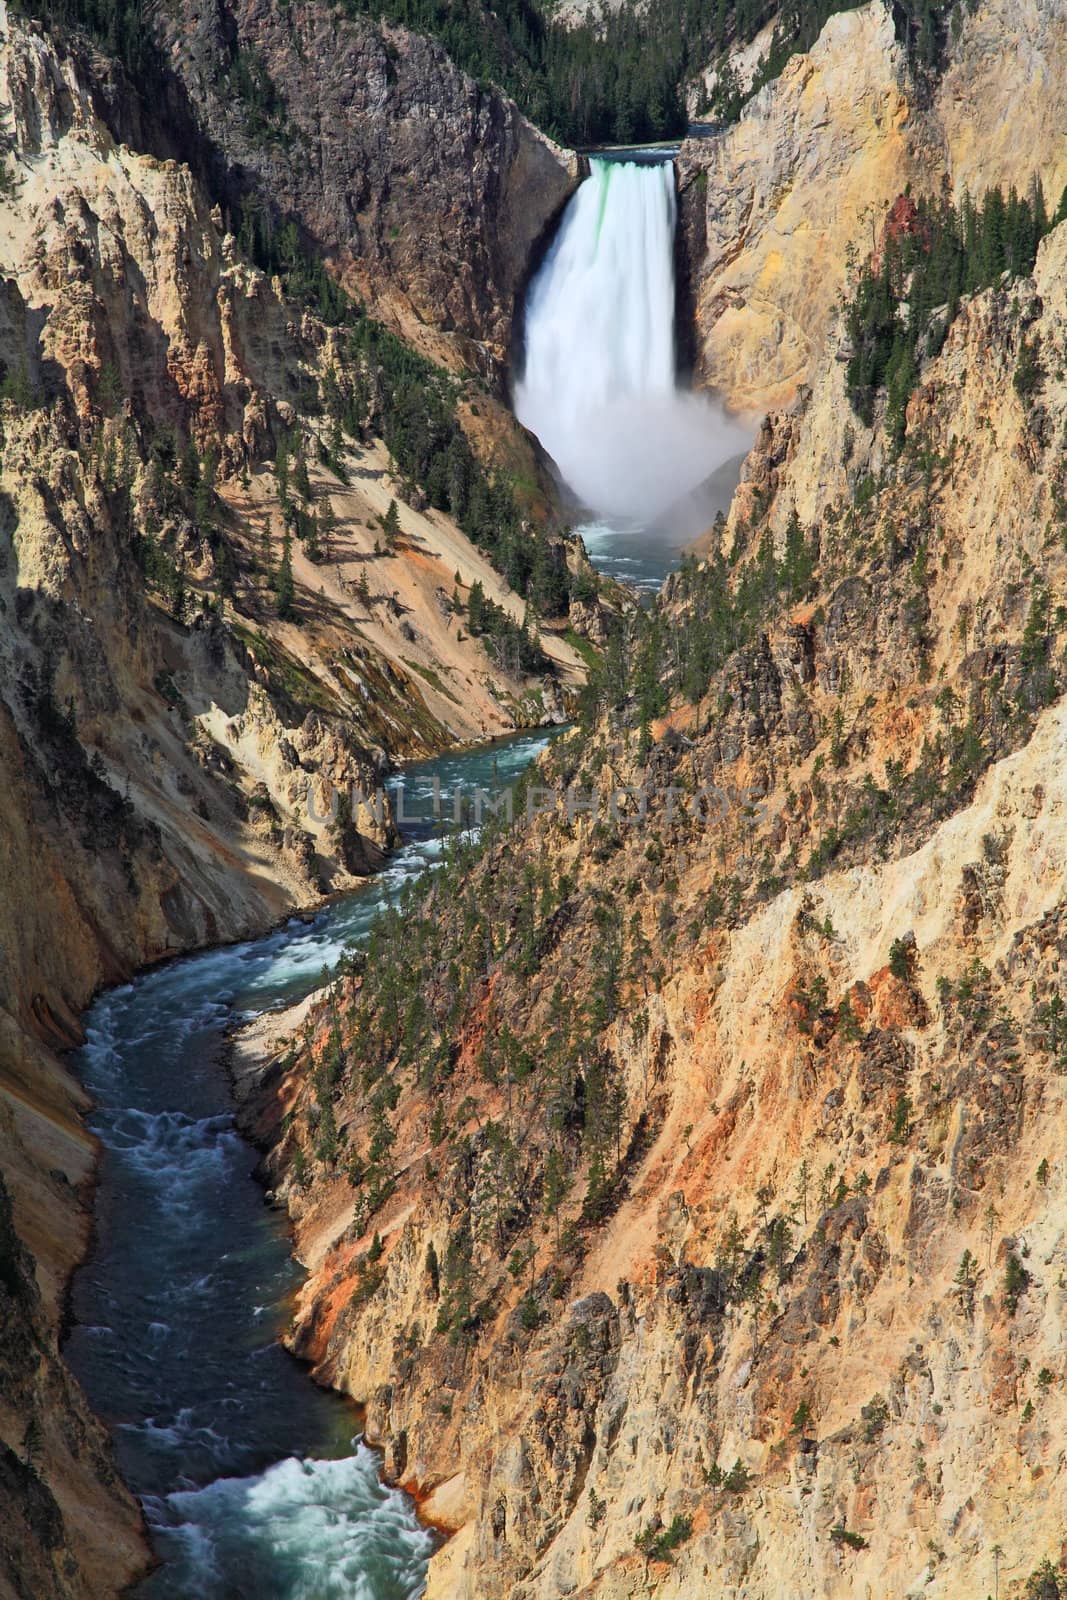 The Lower Falls at the Grand Canyon of the Yellowstone